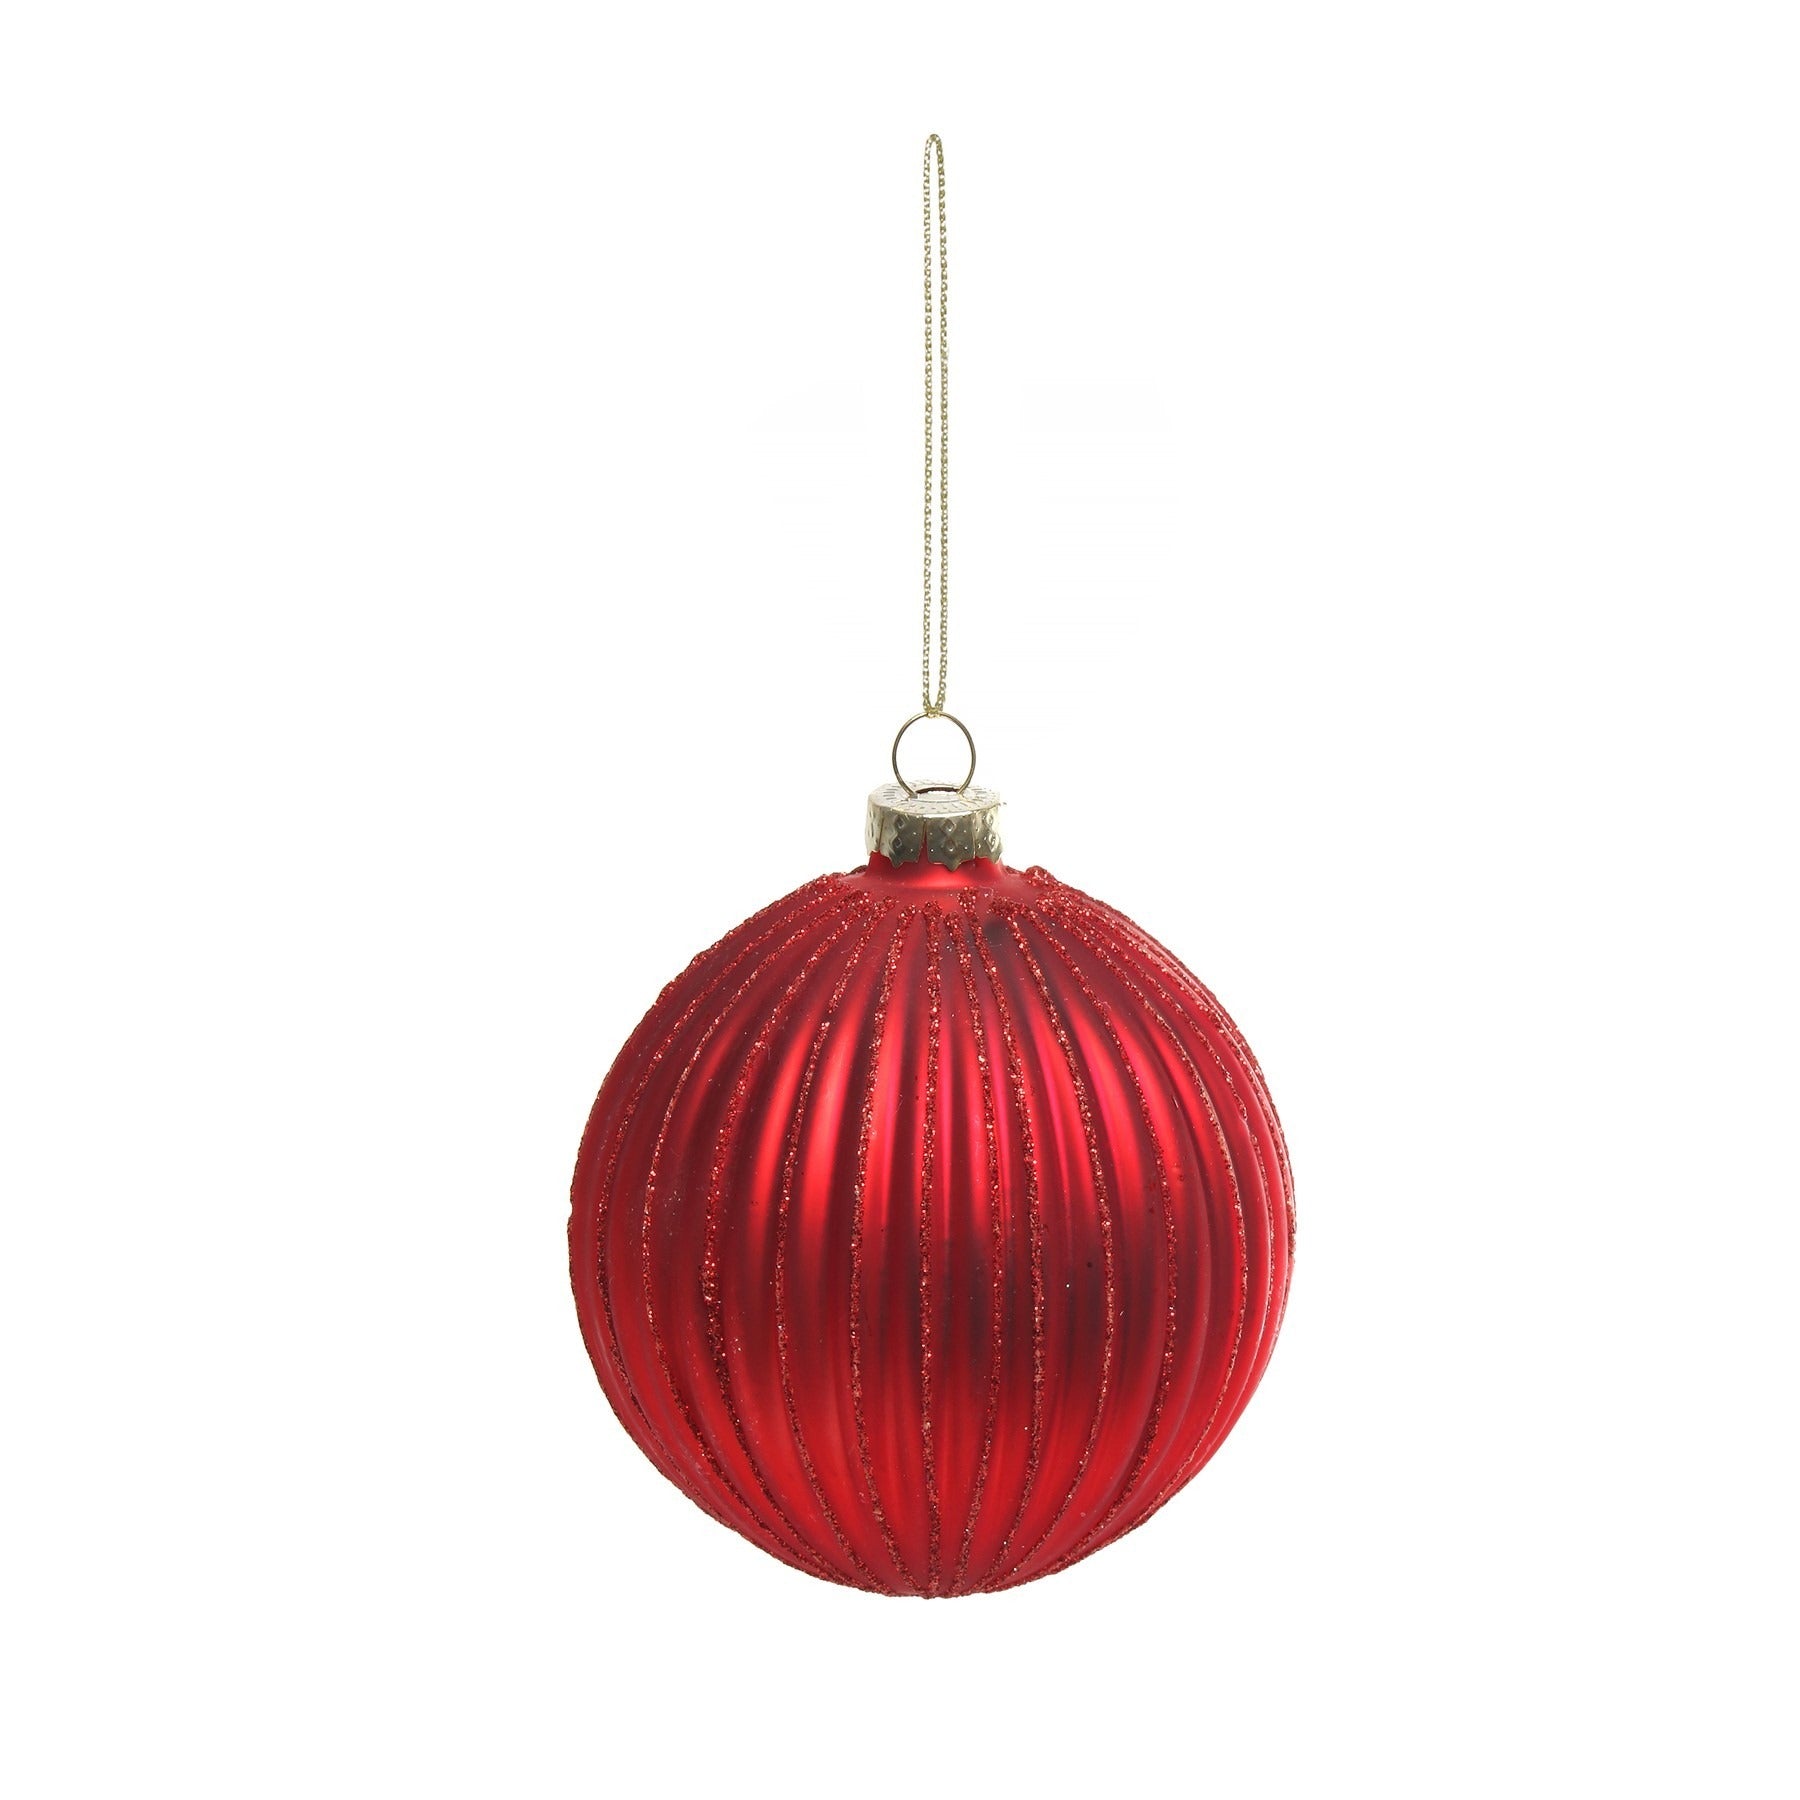 View Red Glass Bauble with Stripes Dia8cm information